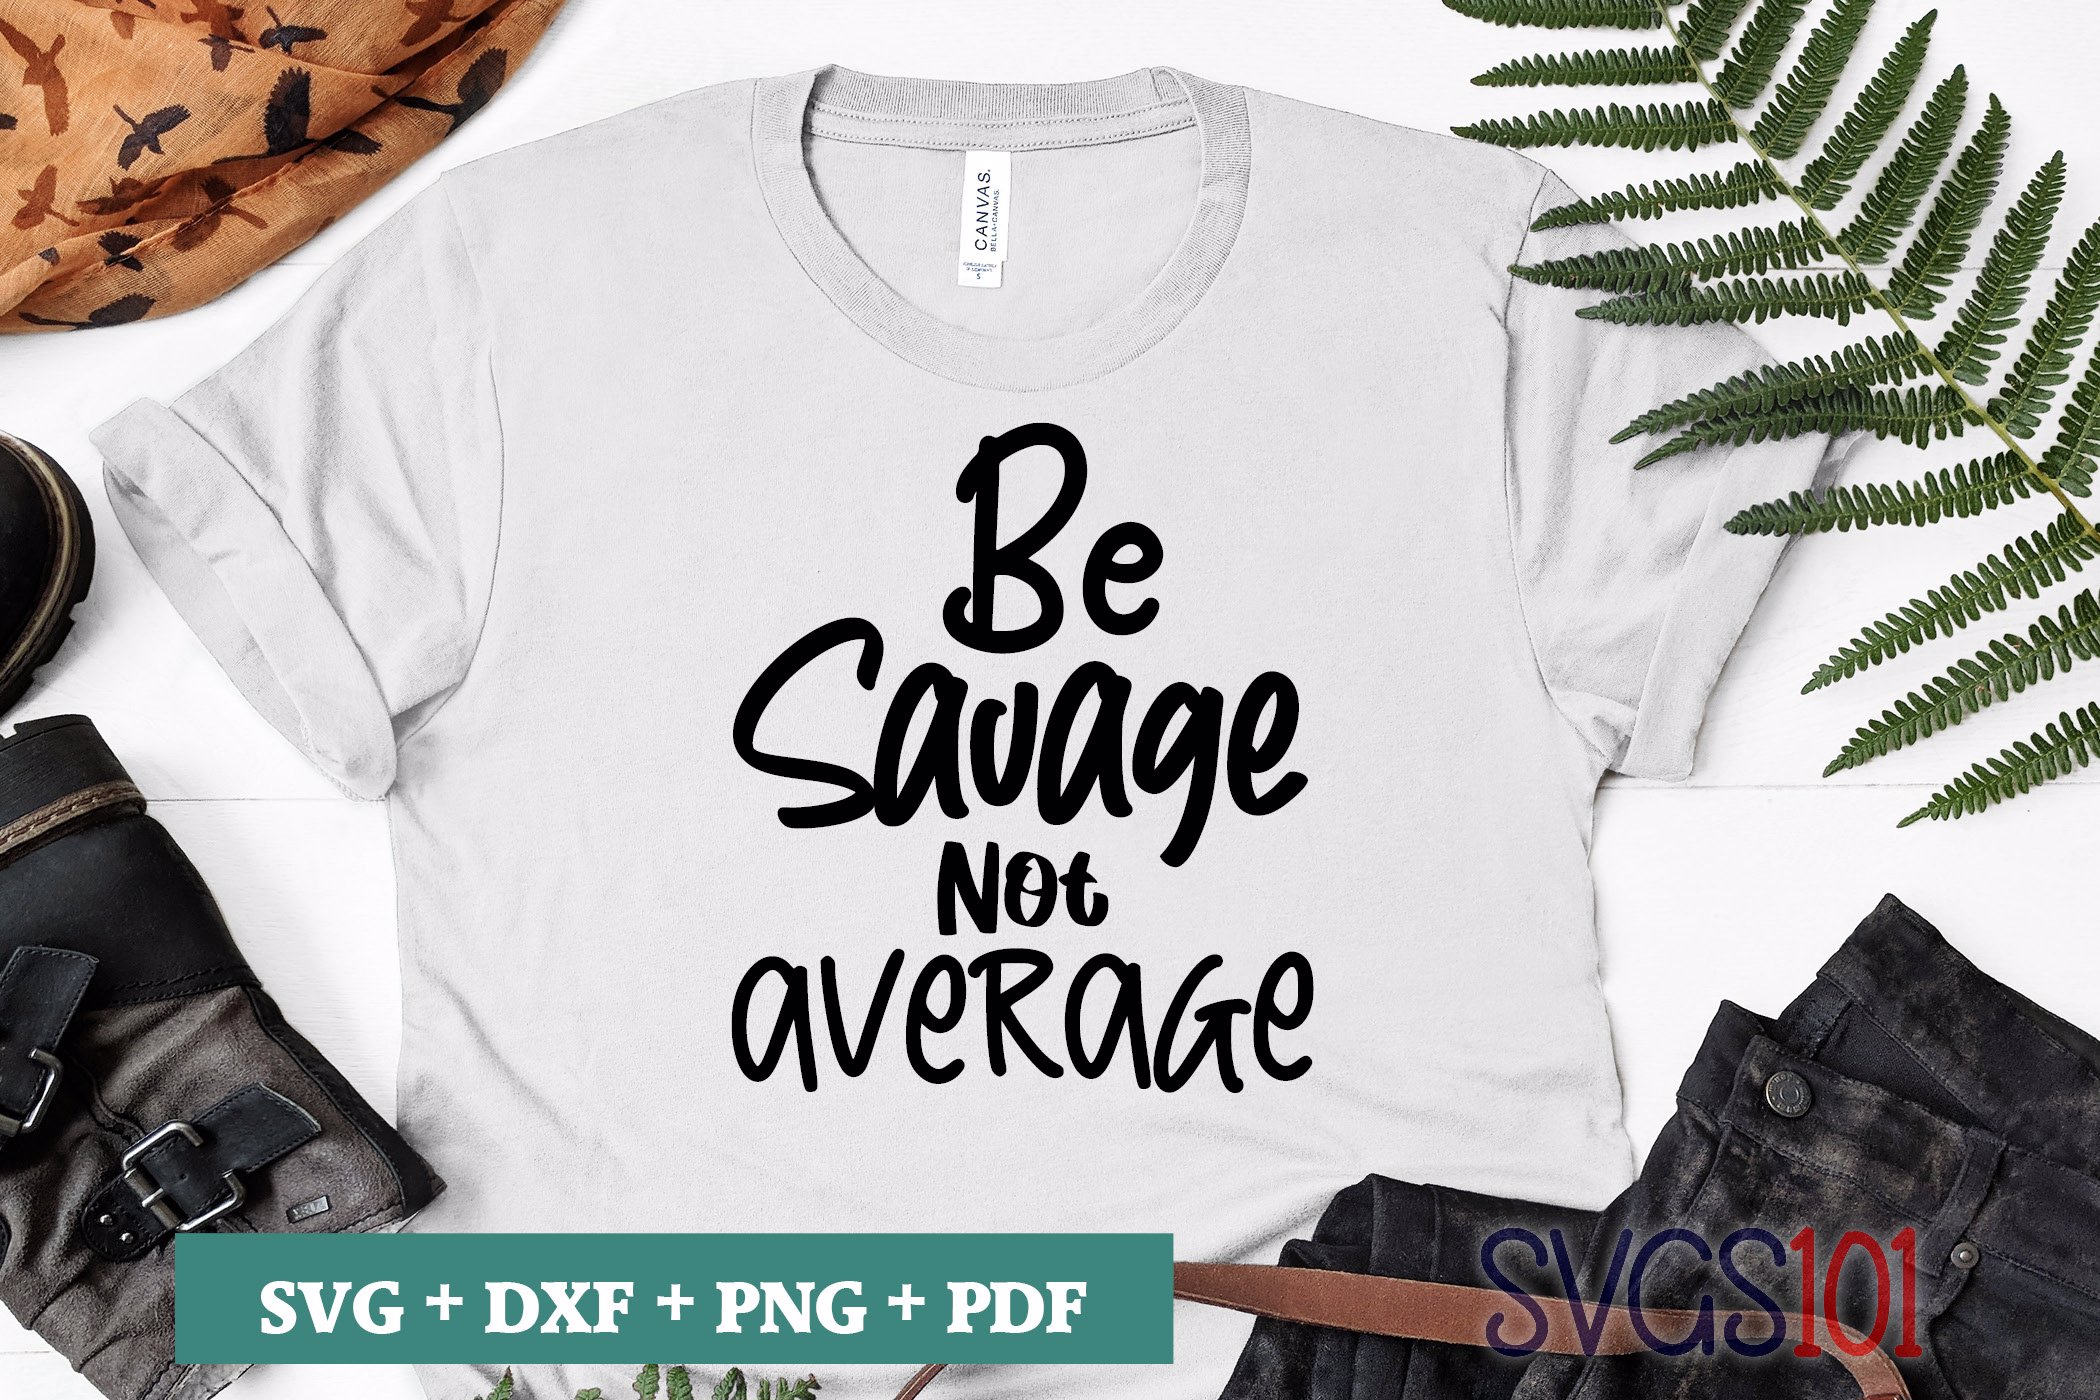 Be Savage Not Average SVG Cuttable file - DXF, EPS, PNG, PDF | SVG ...